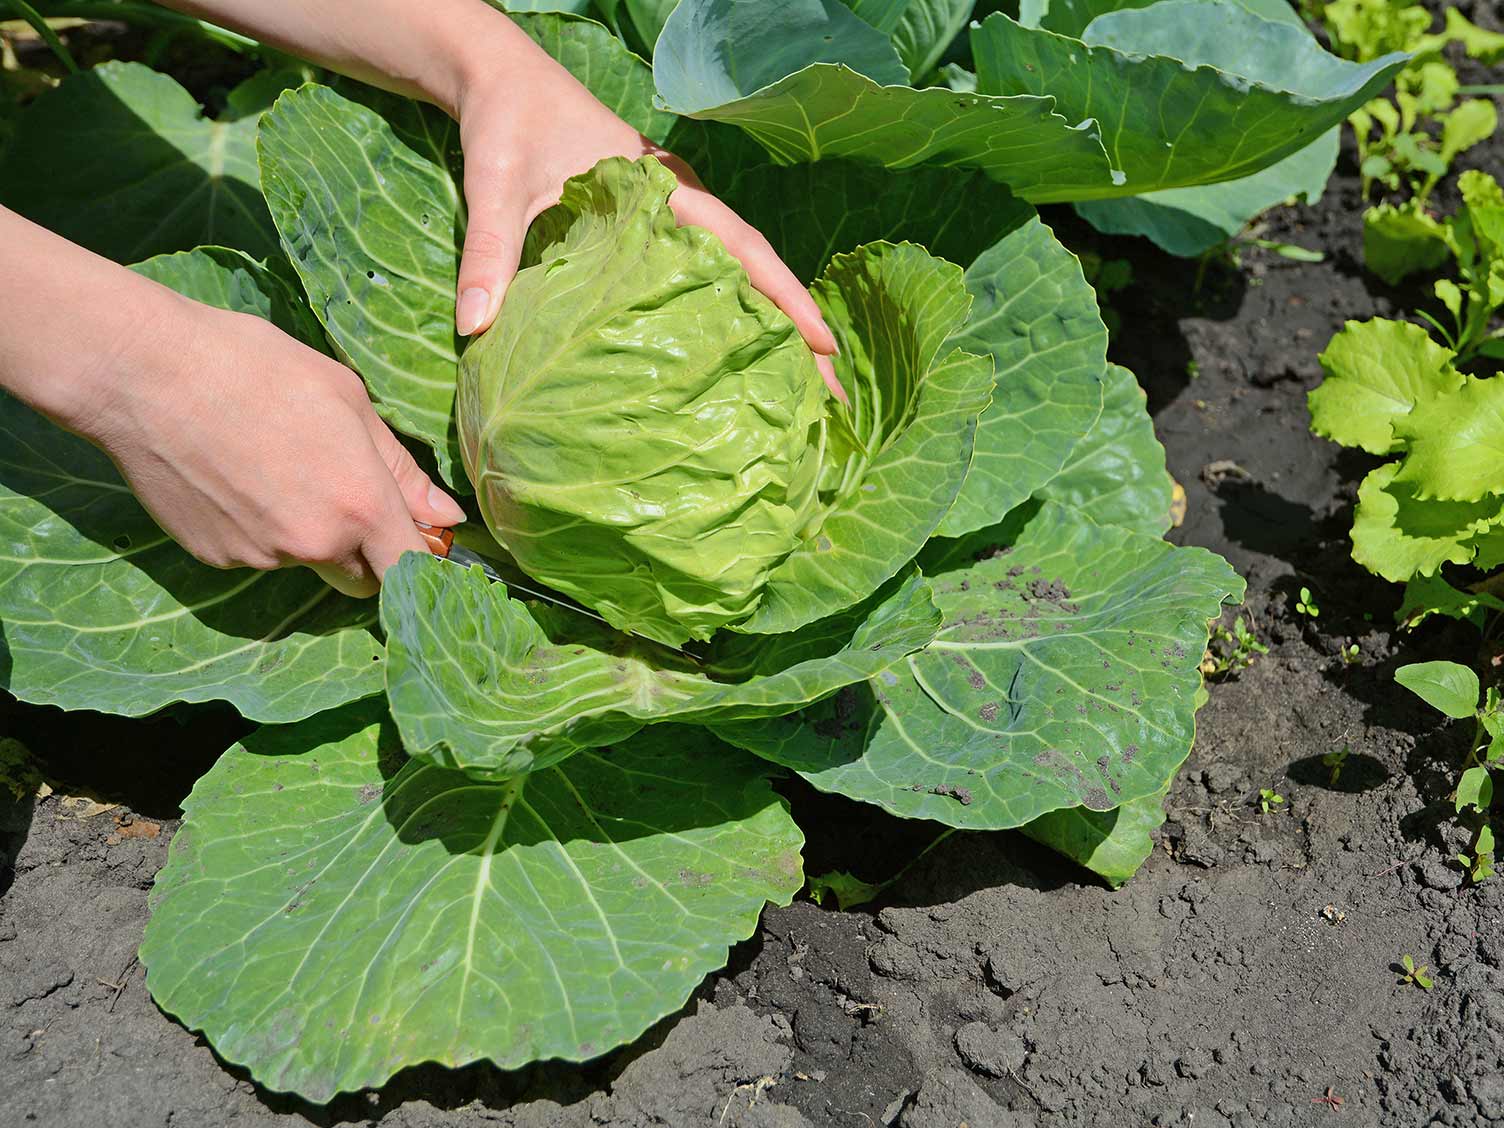 Harvesting cabbages